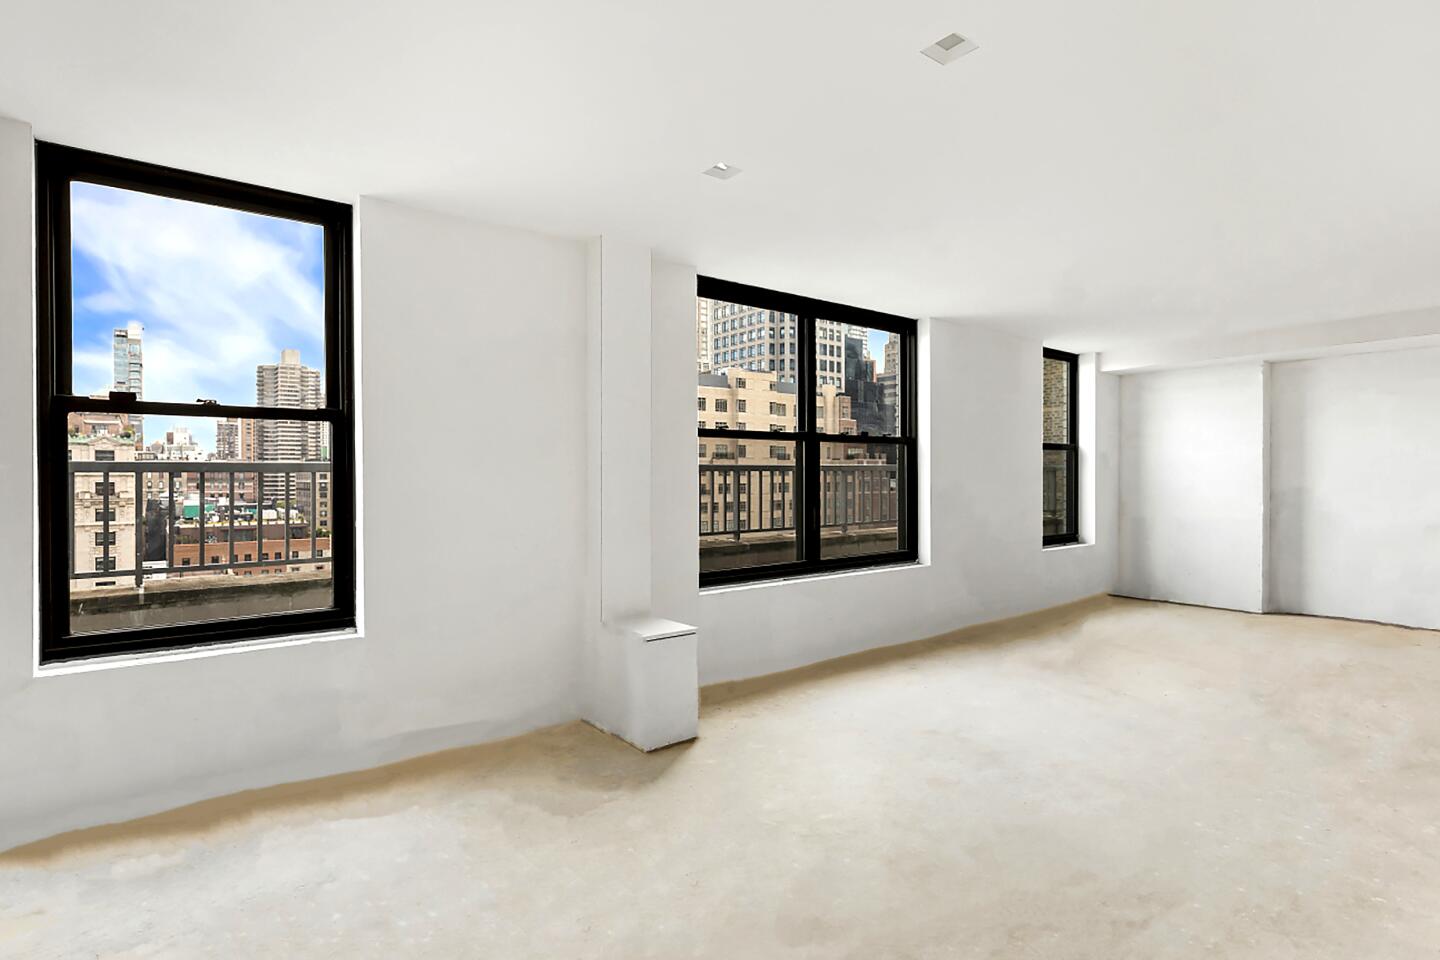 A carpeted room in the apartment with window views